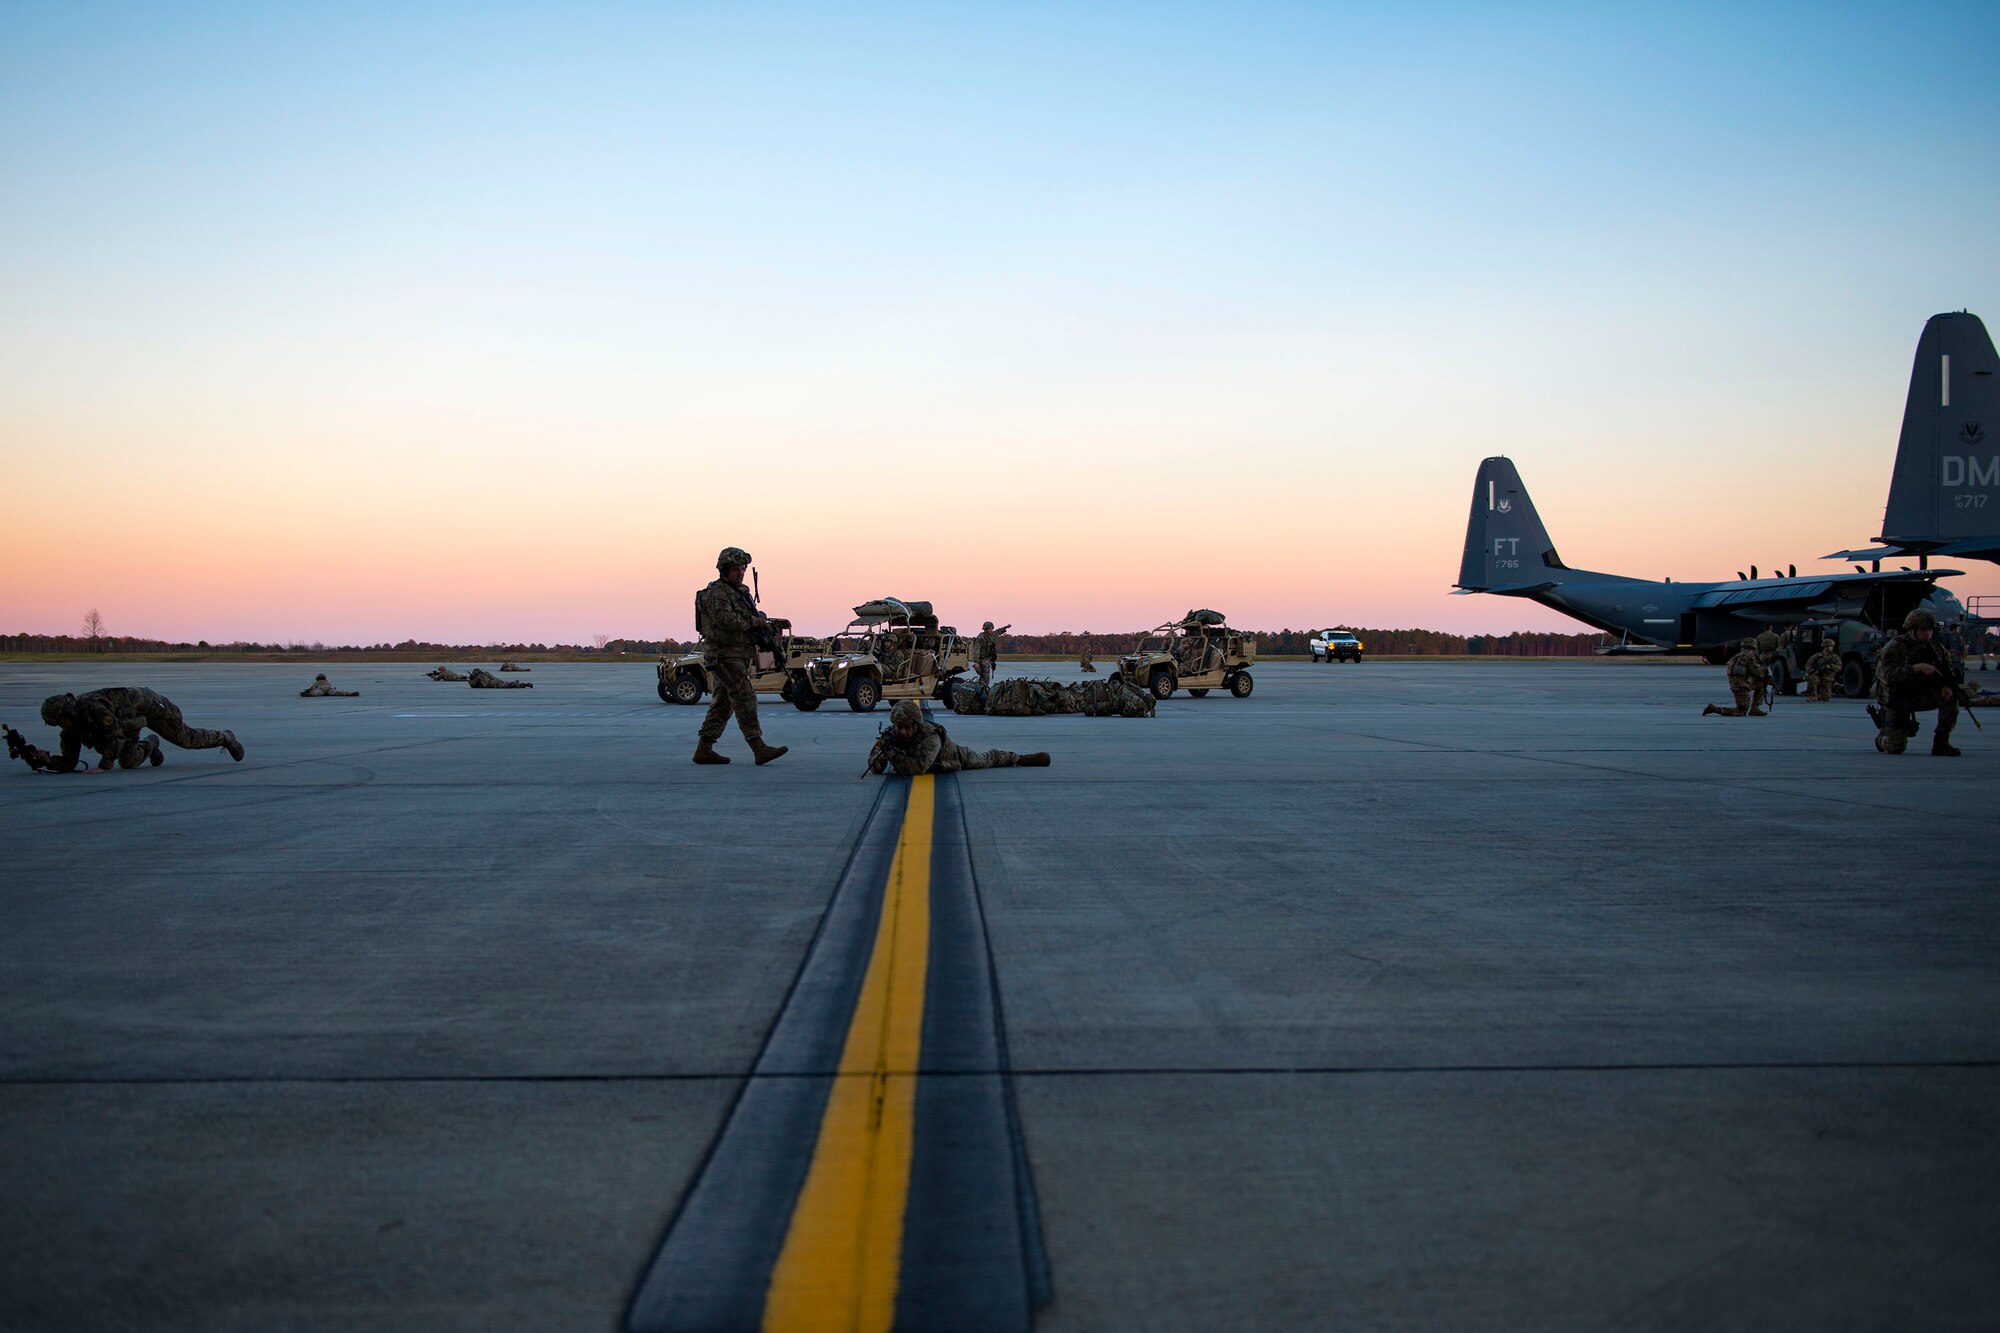 Airmen from the 823d Base Defense Squadron (BDS) set up airfield security during airfield security training, Jan. 28, 2019, at Moody Air Force Base, Ga. The training was geared toward bolstering the 823d BDS’s adaptive base readiness, which consisted of improving Airmen’s capabilities to effectively and efficiently on-load equipment along with more than 30 fully-equipped personnel into an aircraft, followed by establishing airfield security. (U.S. Air Force photo by Airman 1st Class Erick Requadt)